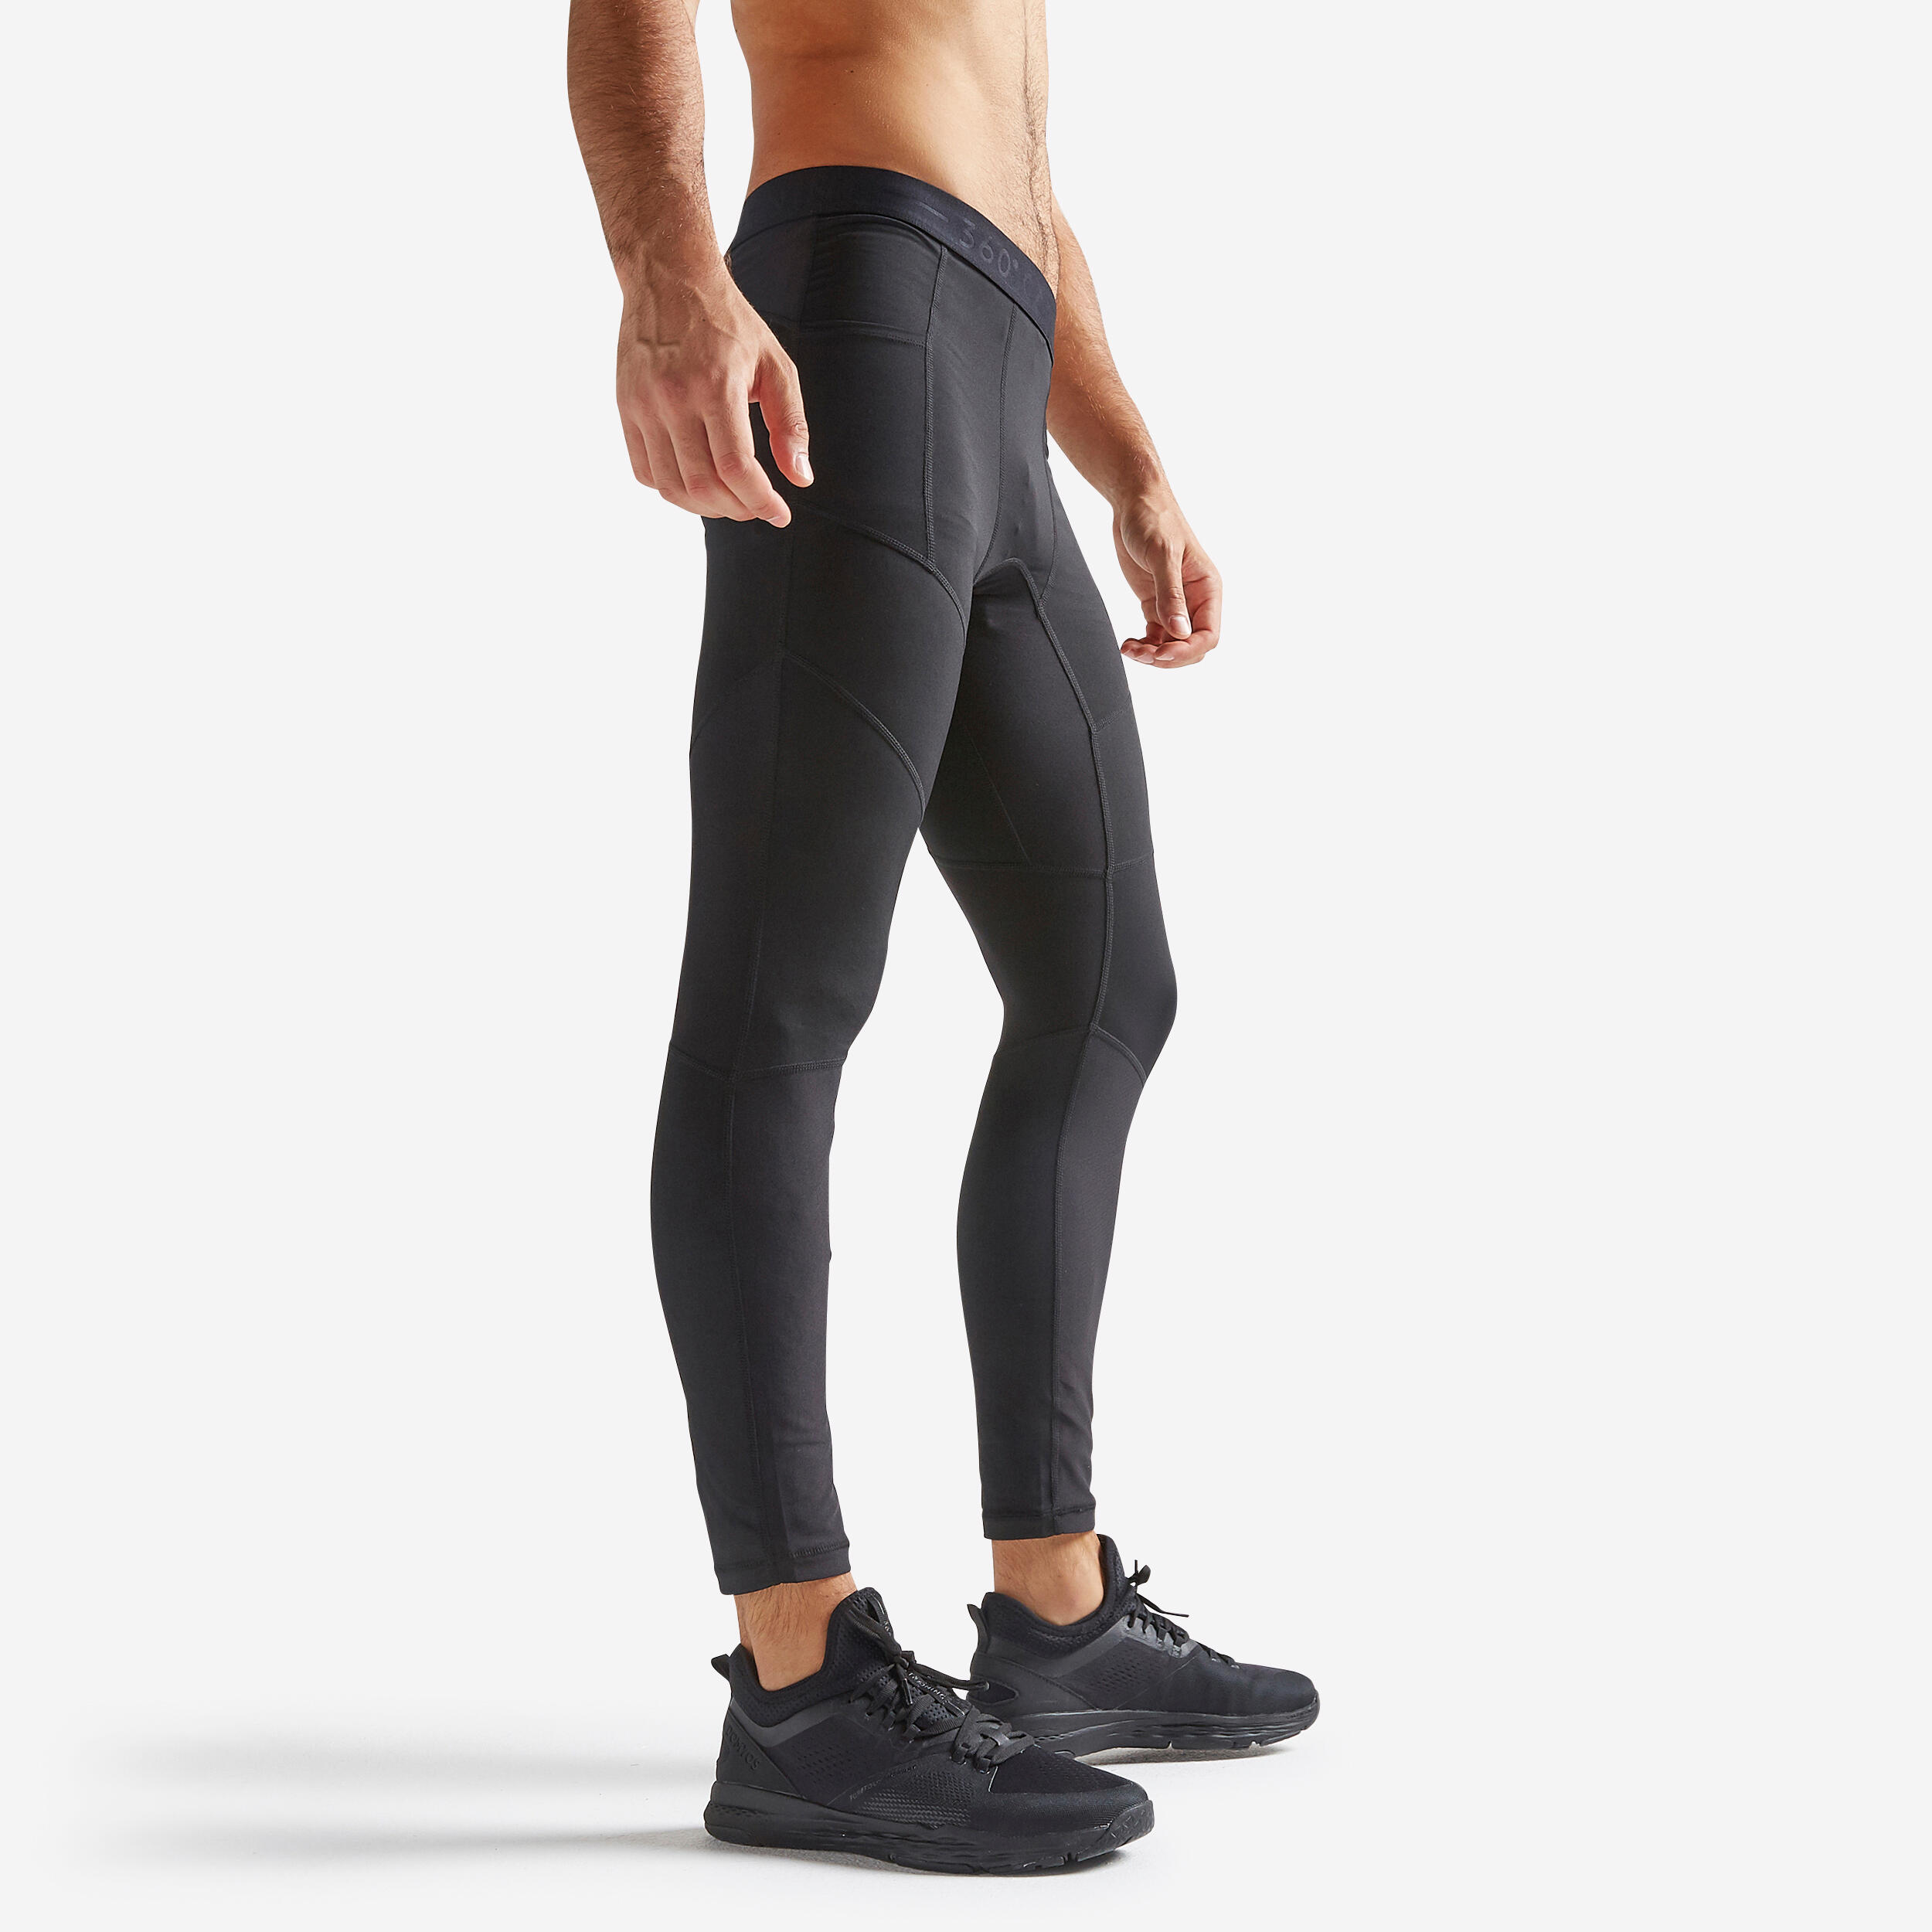 Men's Compression Running Tights with Zipper Pockets | Quick Dry Yoga  Cycling Leggings